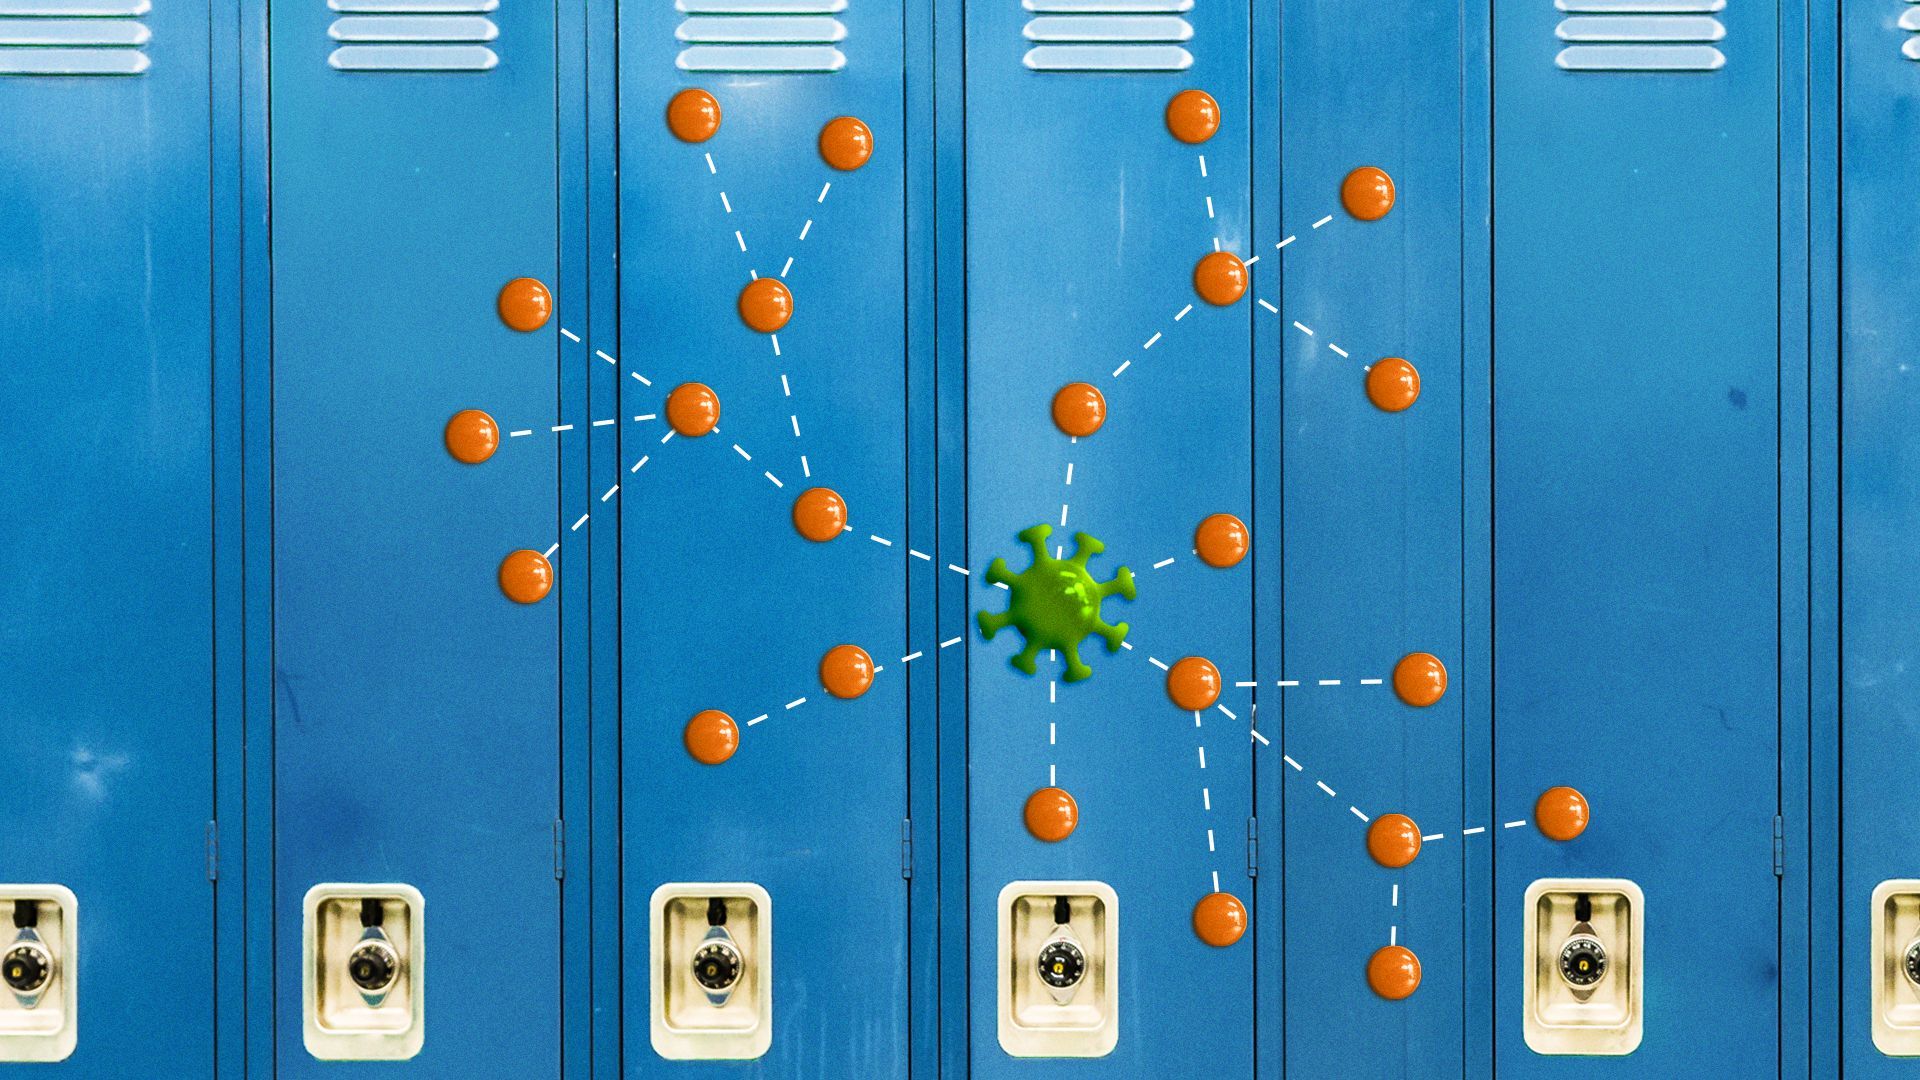 Illustration of magnets on a school locker in the shape of a contact tracing chart.